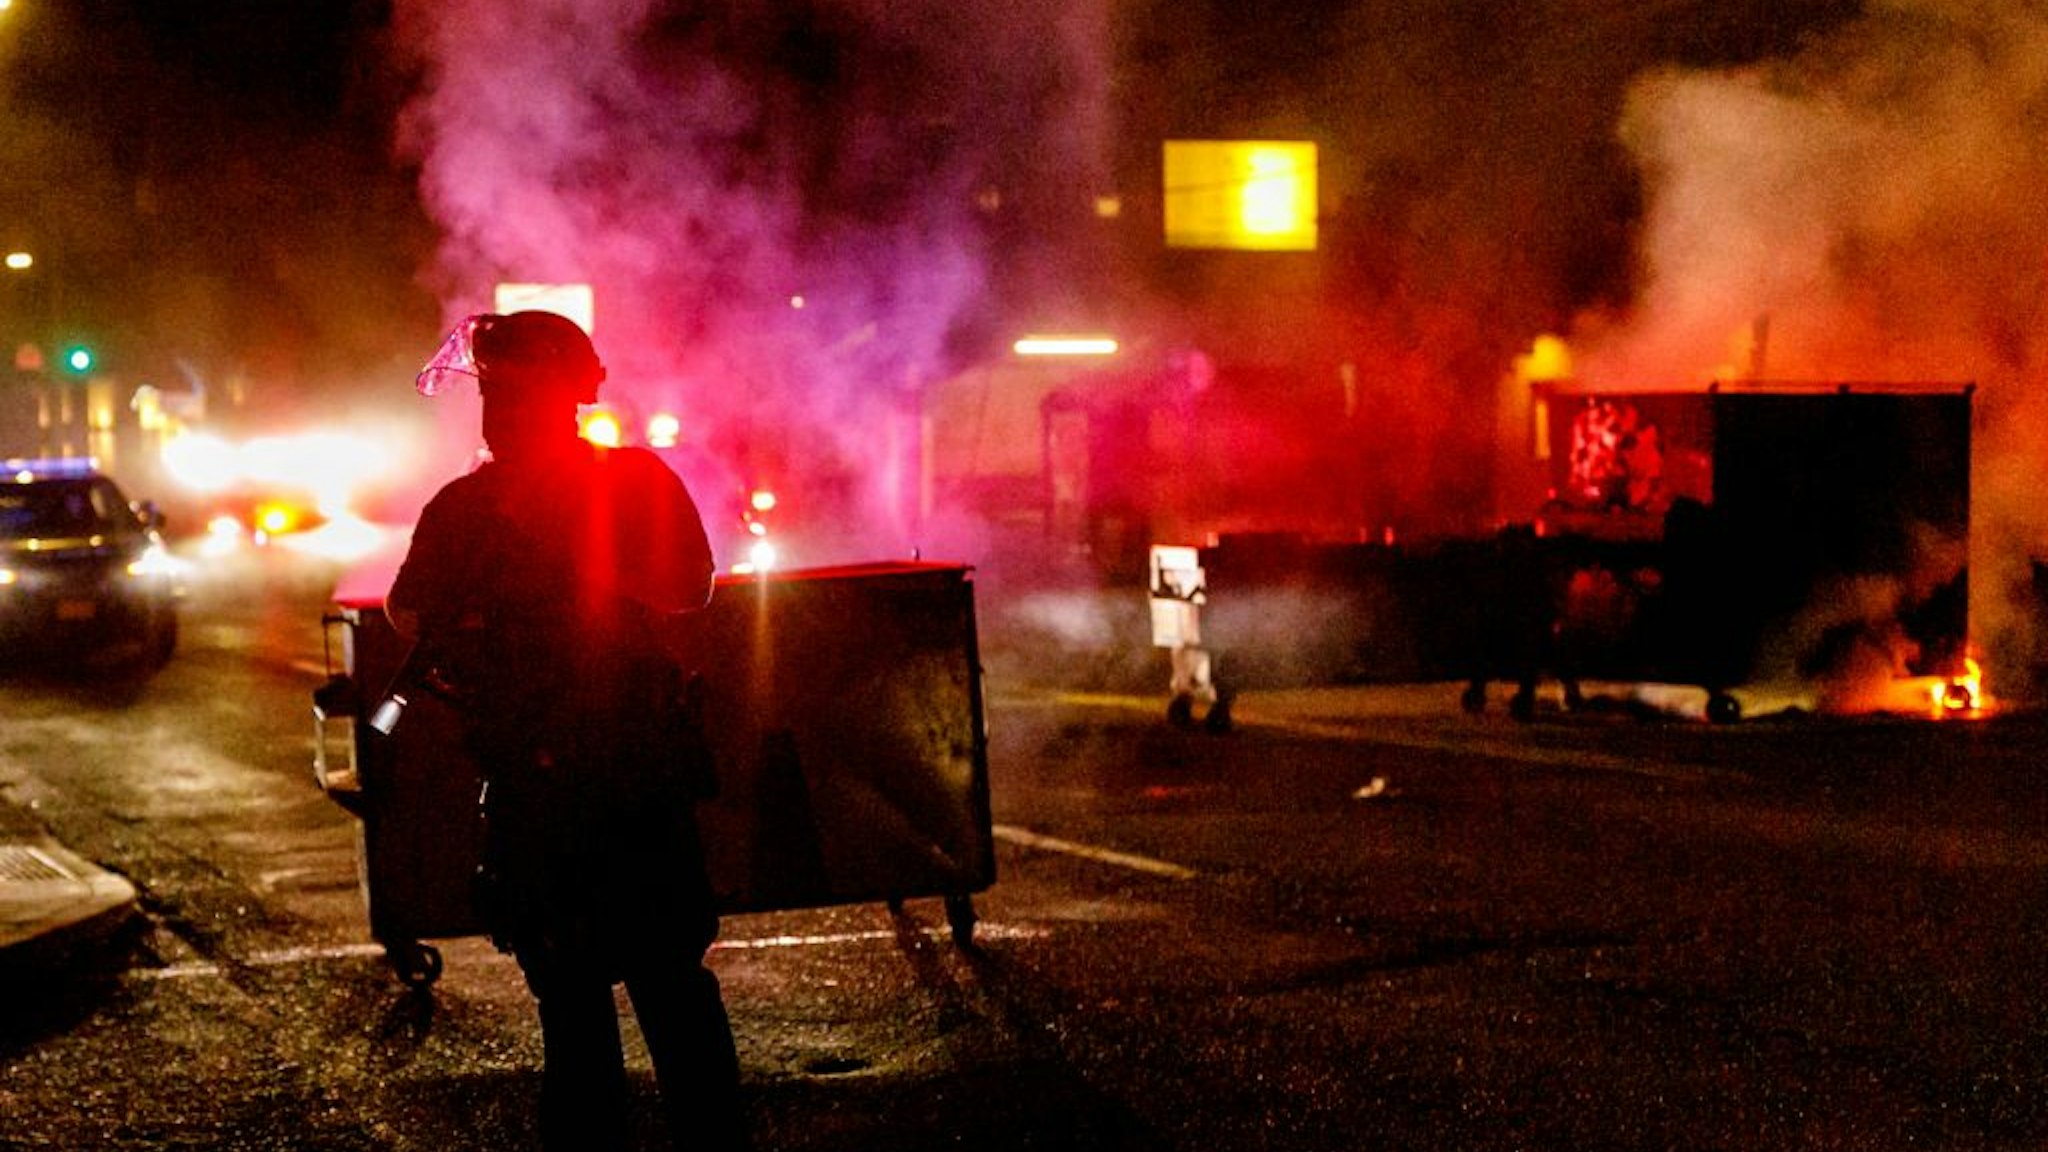 PORTLAND, OREGON, USA - AUGUST 28: About two hundred persons protesting police brutality spray graffiti and start fires at the Portland Police Union building, in Portland, Oregon, United States on August 28, 2020, the 93rd day of consecutive protests. Police declared a riot and arrested many people.